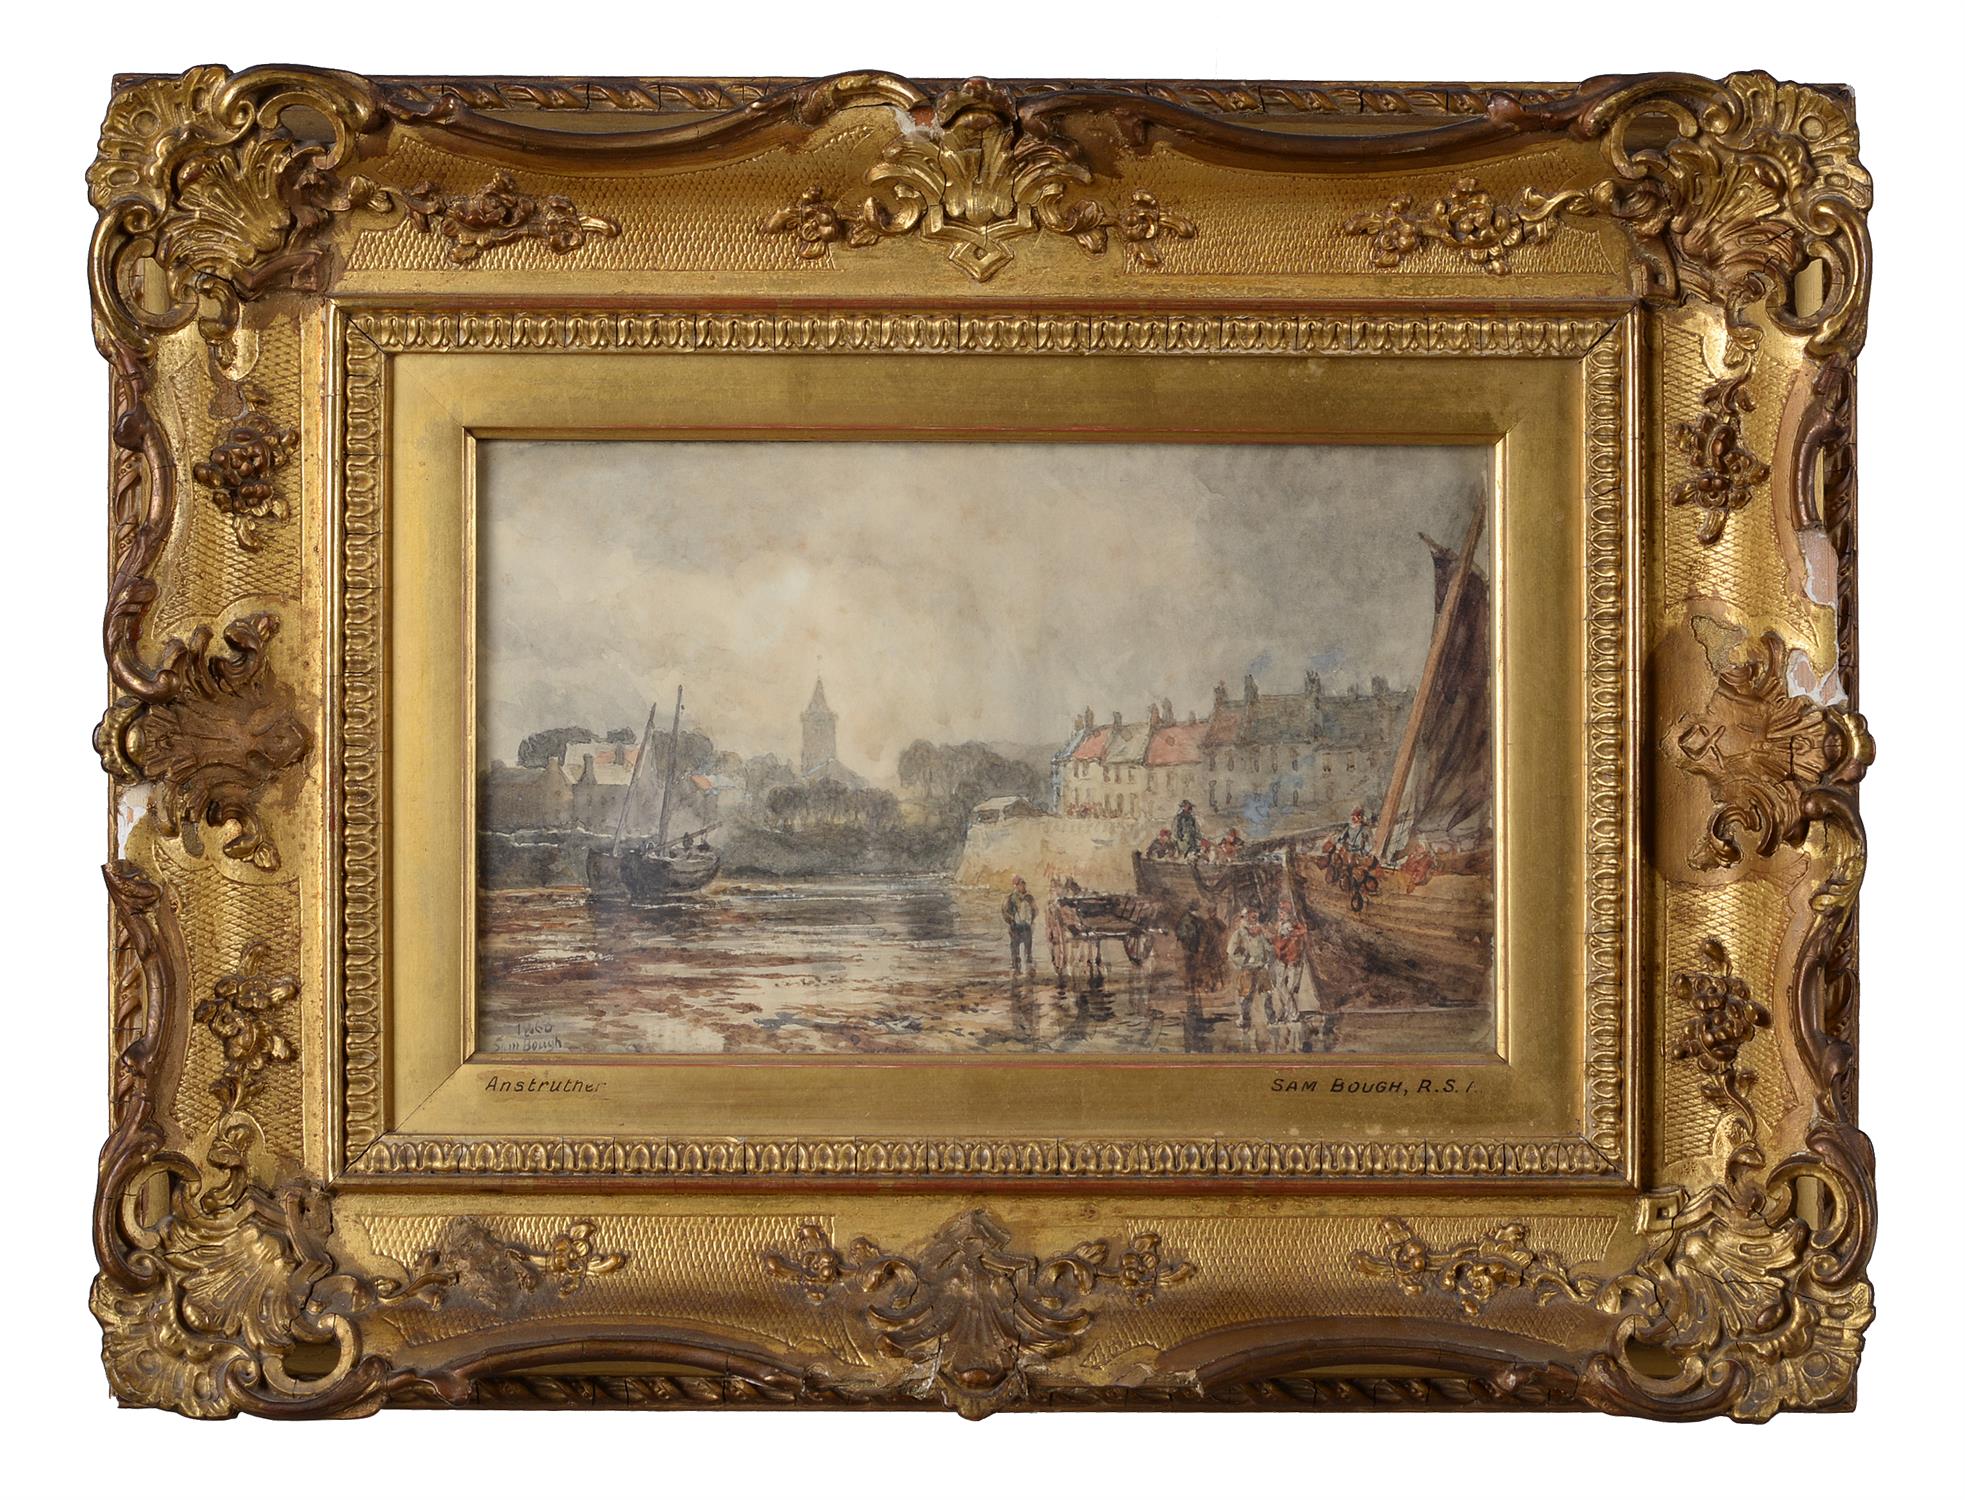 Samuel Bough (British 1822-1878) , View of Anstruther - Image 2 of 3